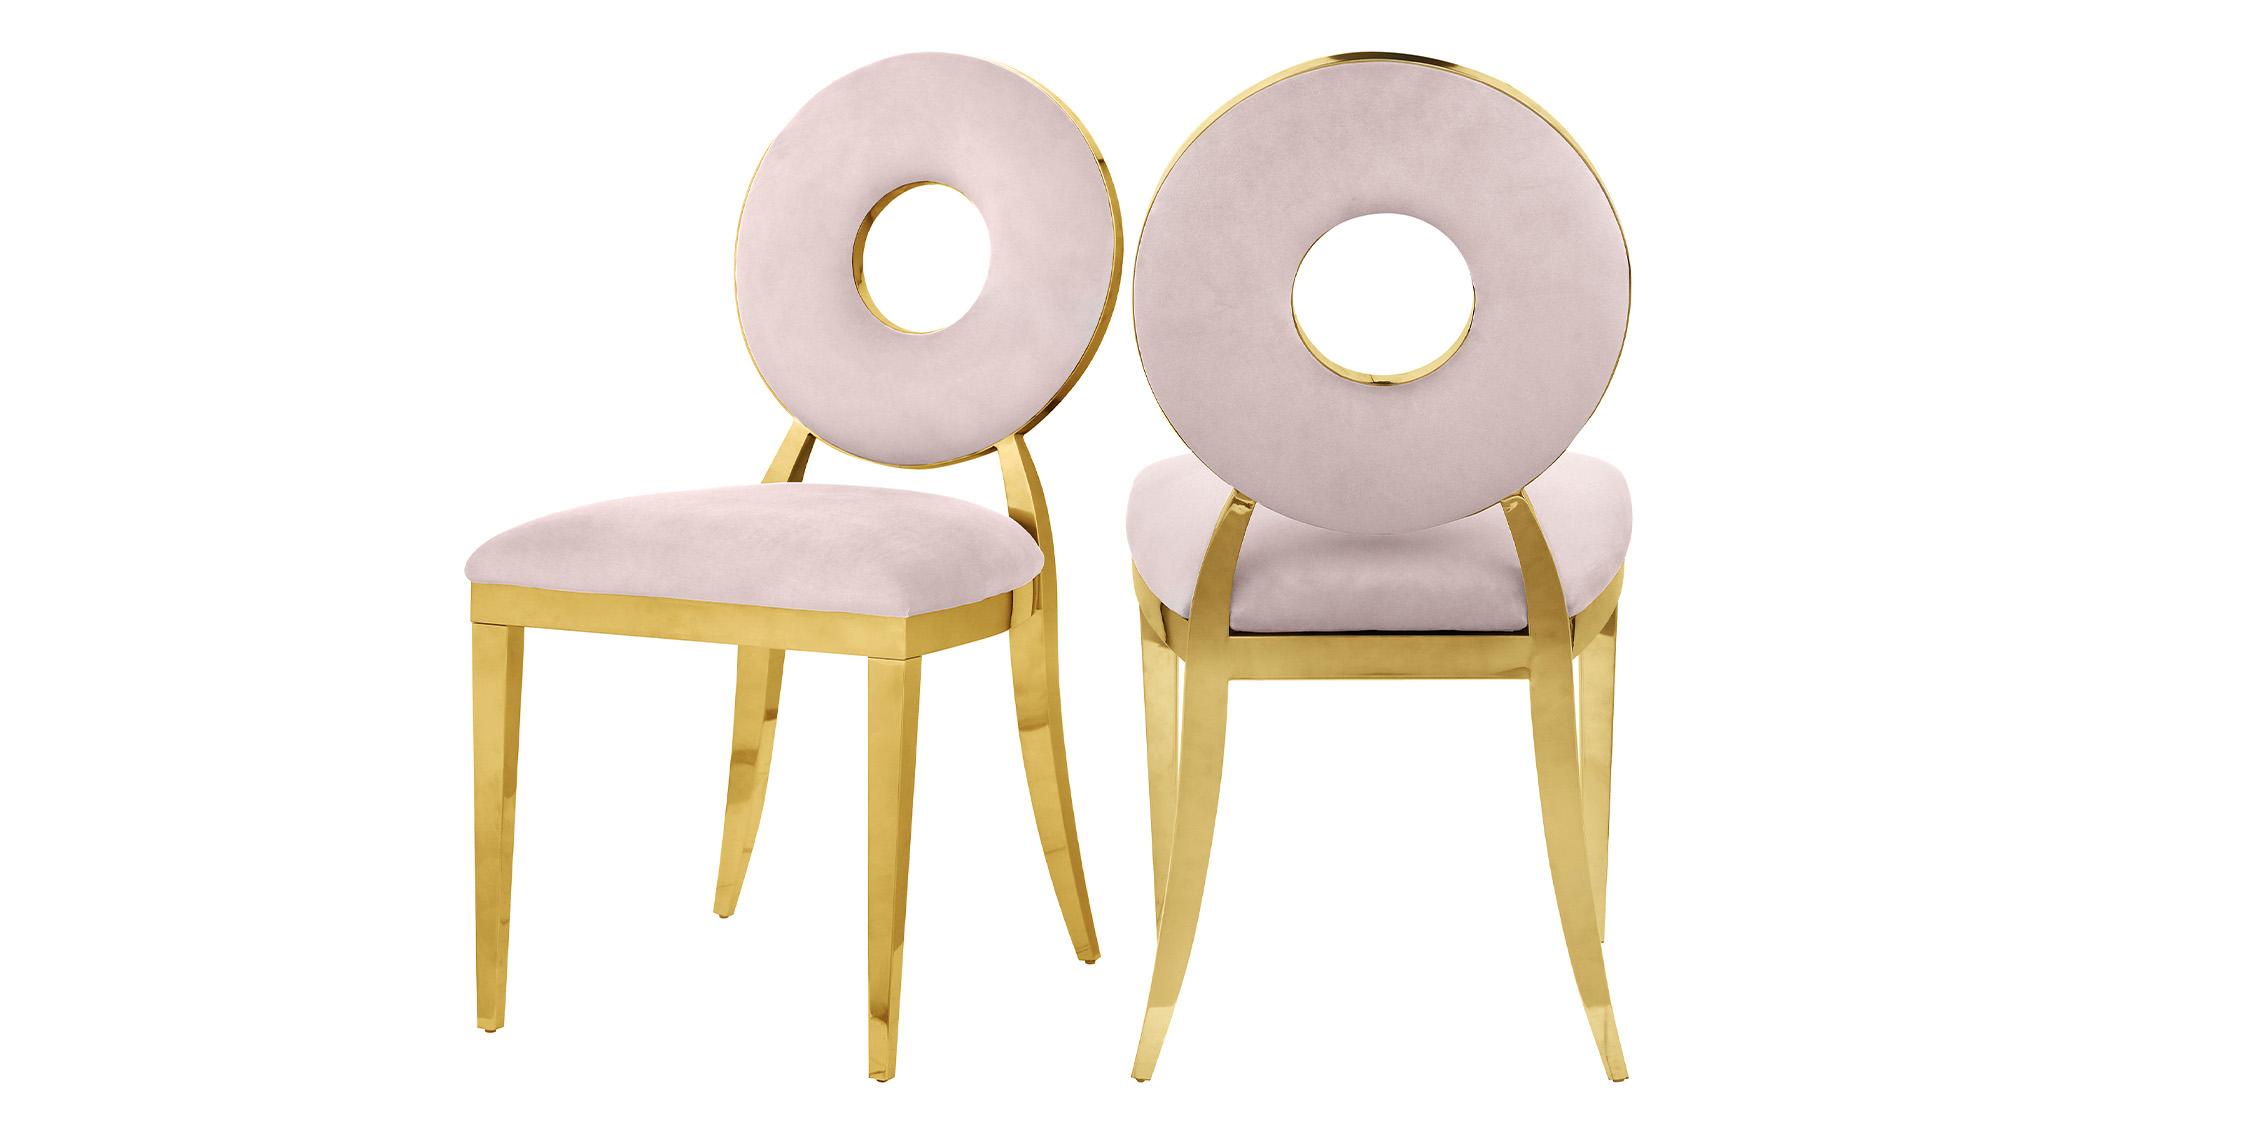 Contemporary Dining Chair Set CAROUSEL 858Pink-C 858Pink-C in Pink, Gold Velvet